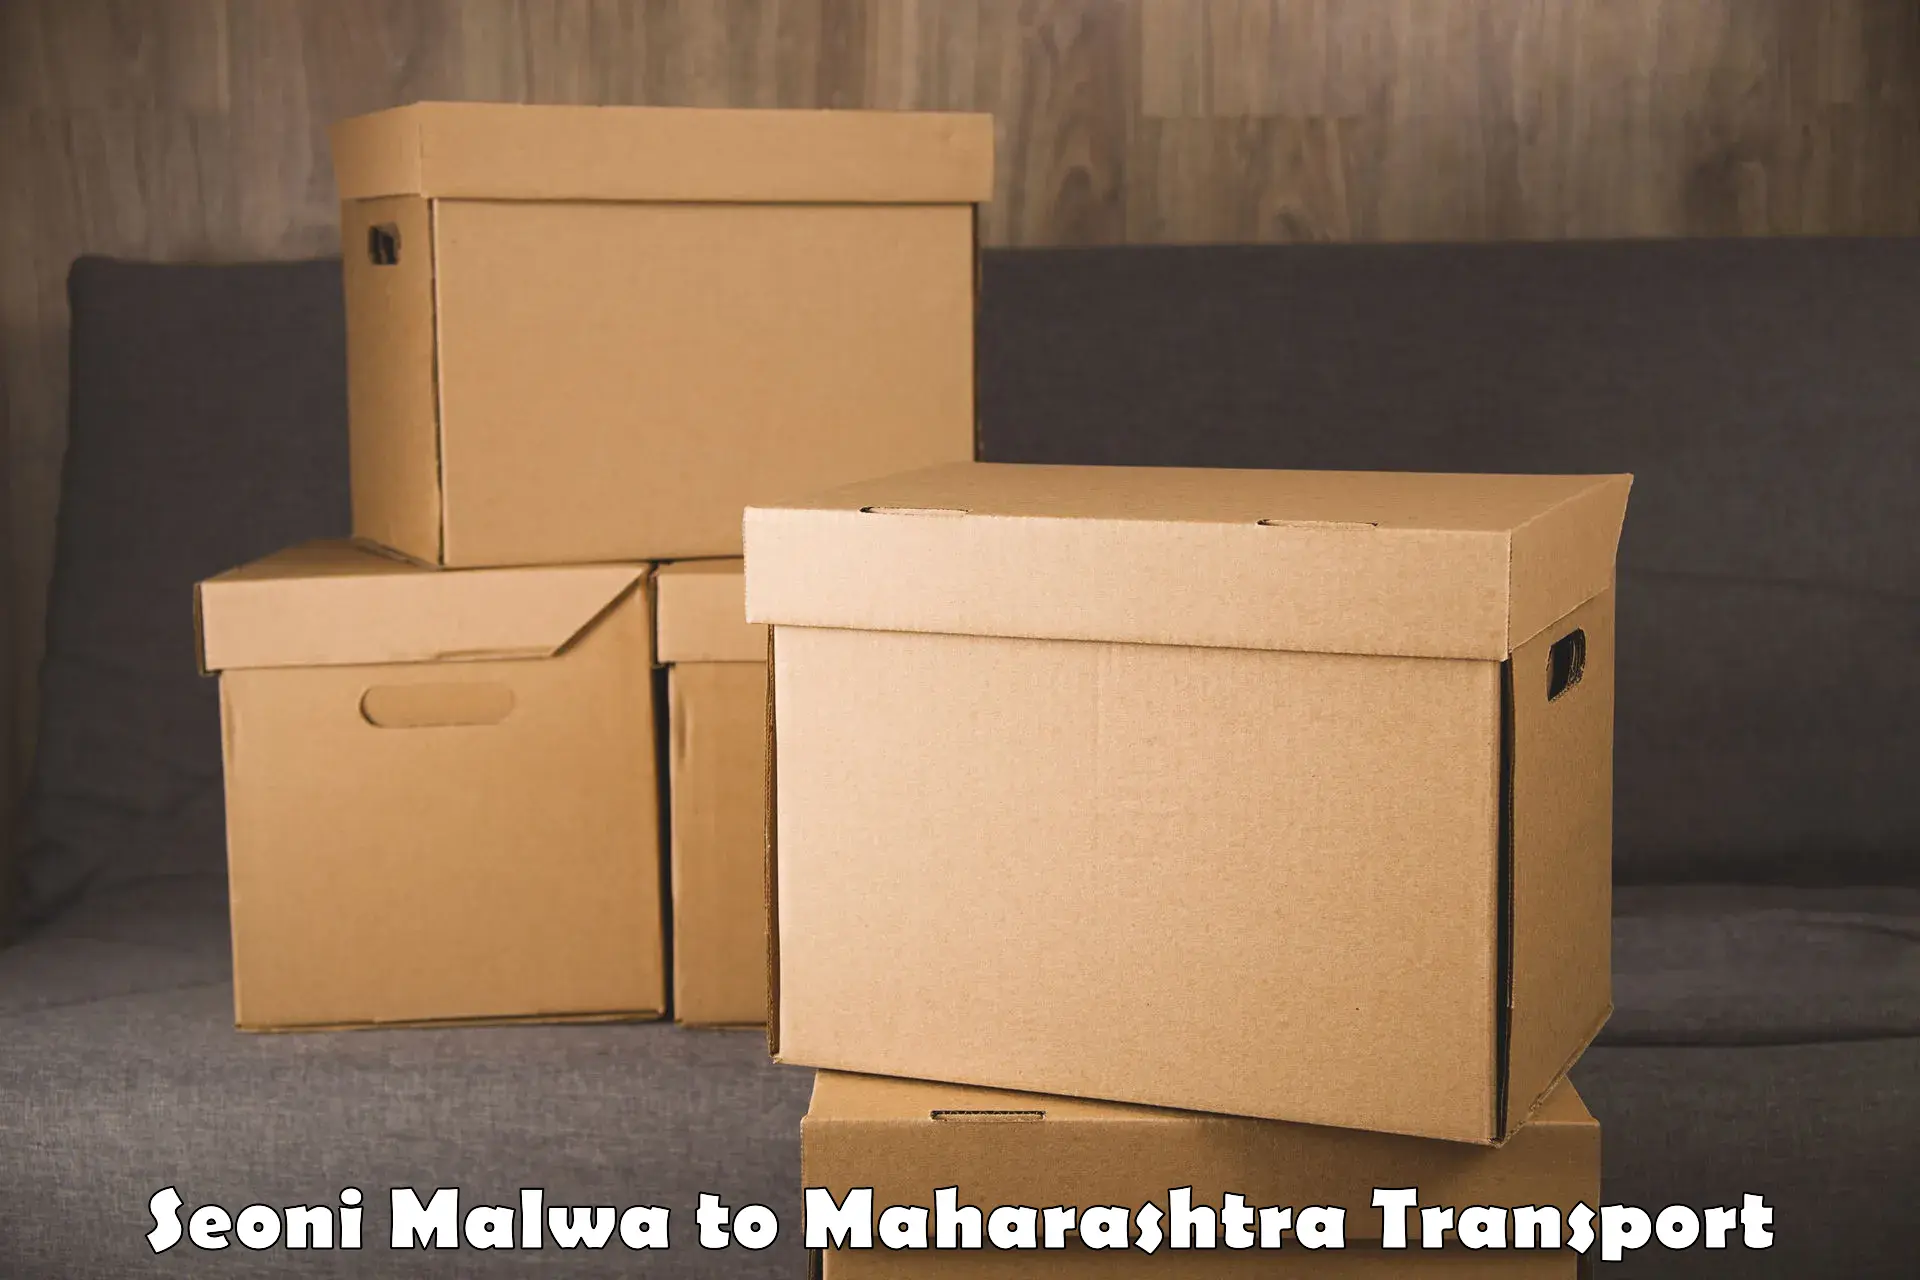 Road transport services in Seoni Malwa to Nagpur